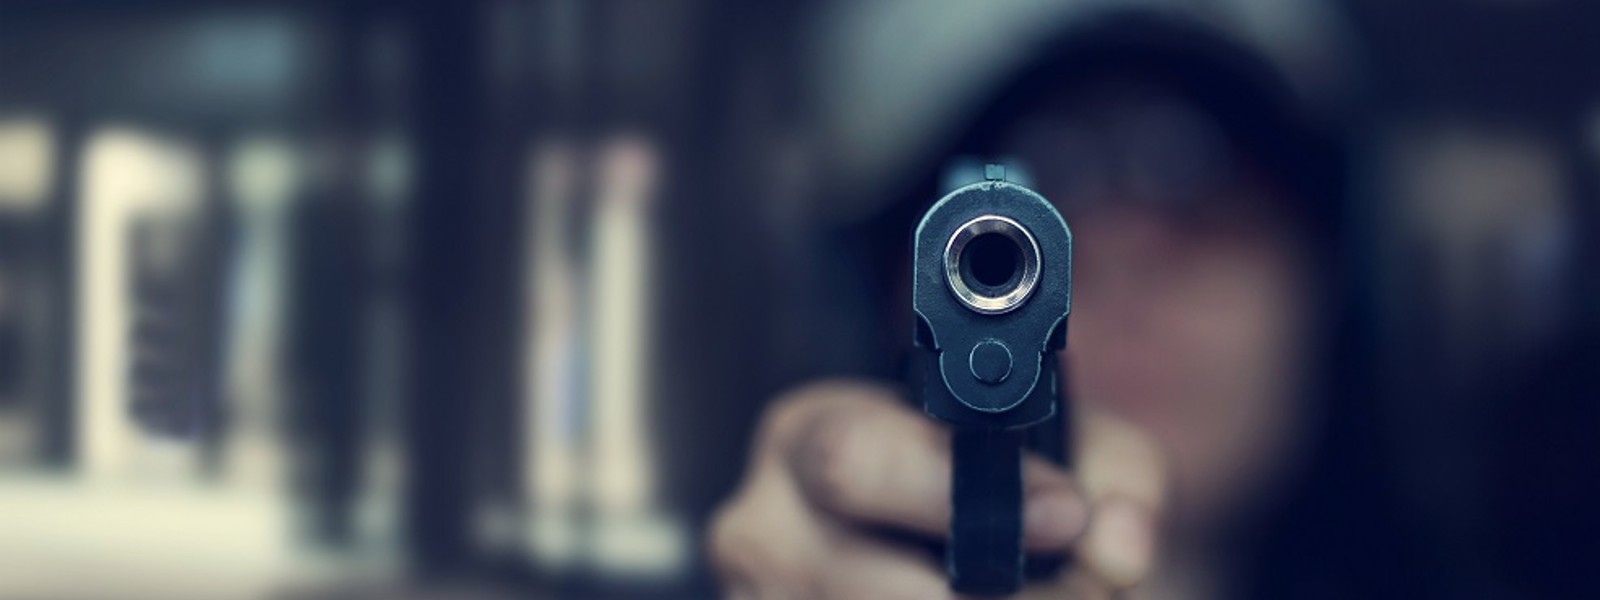 Shooting in Mawathagama, One dead